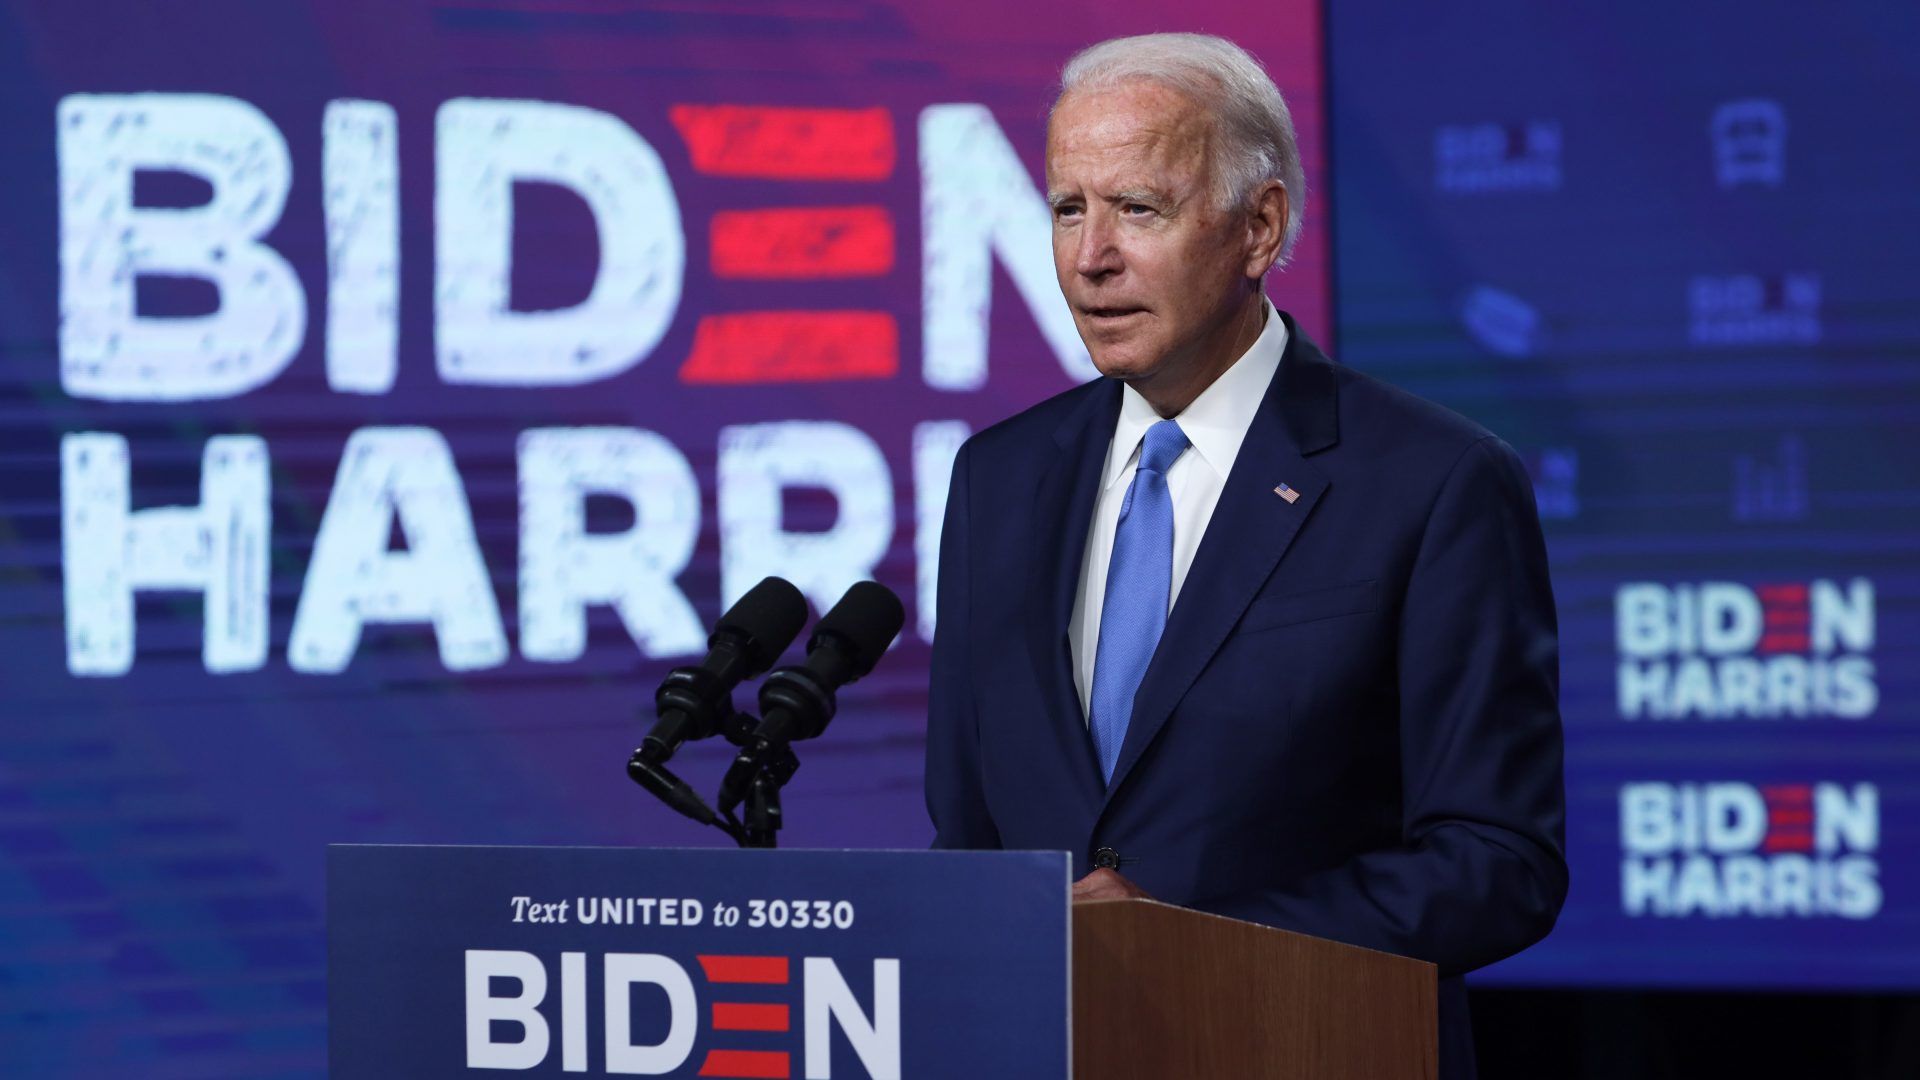 Labor Day bringing Biden to Harrisburg, Harris and Pence to Wisconsin